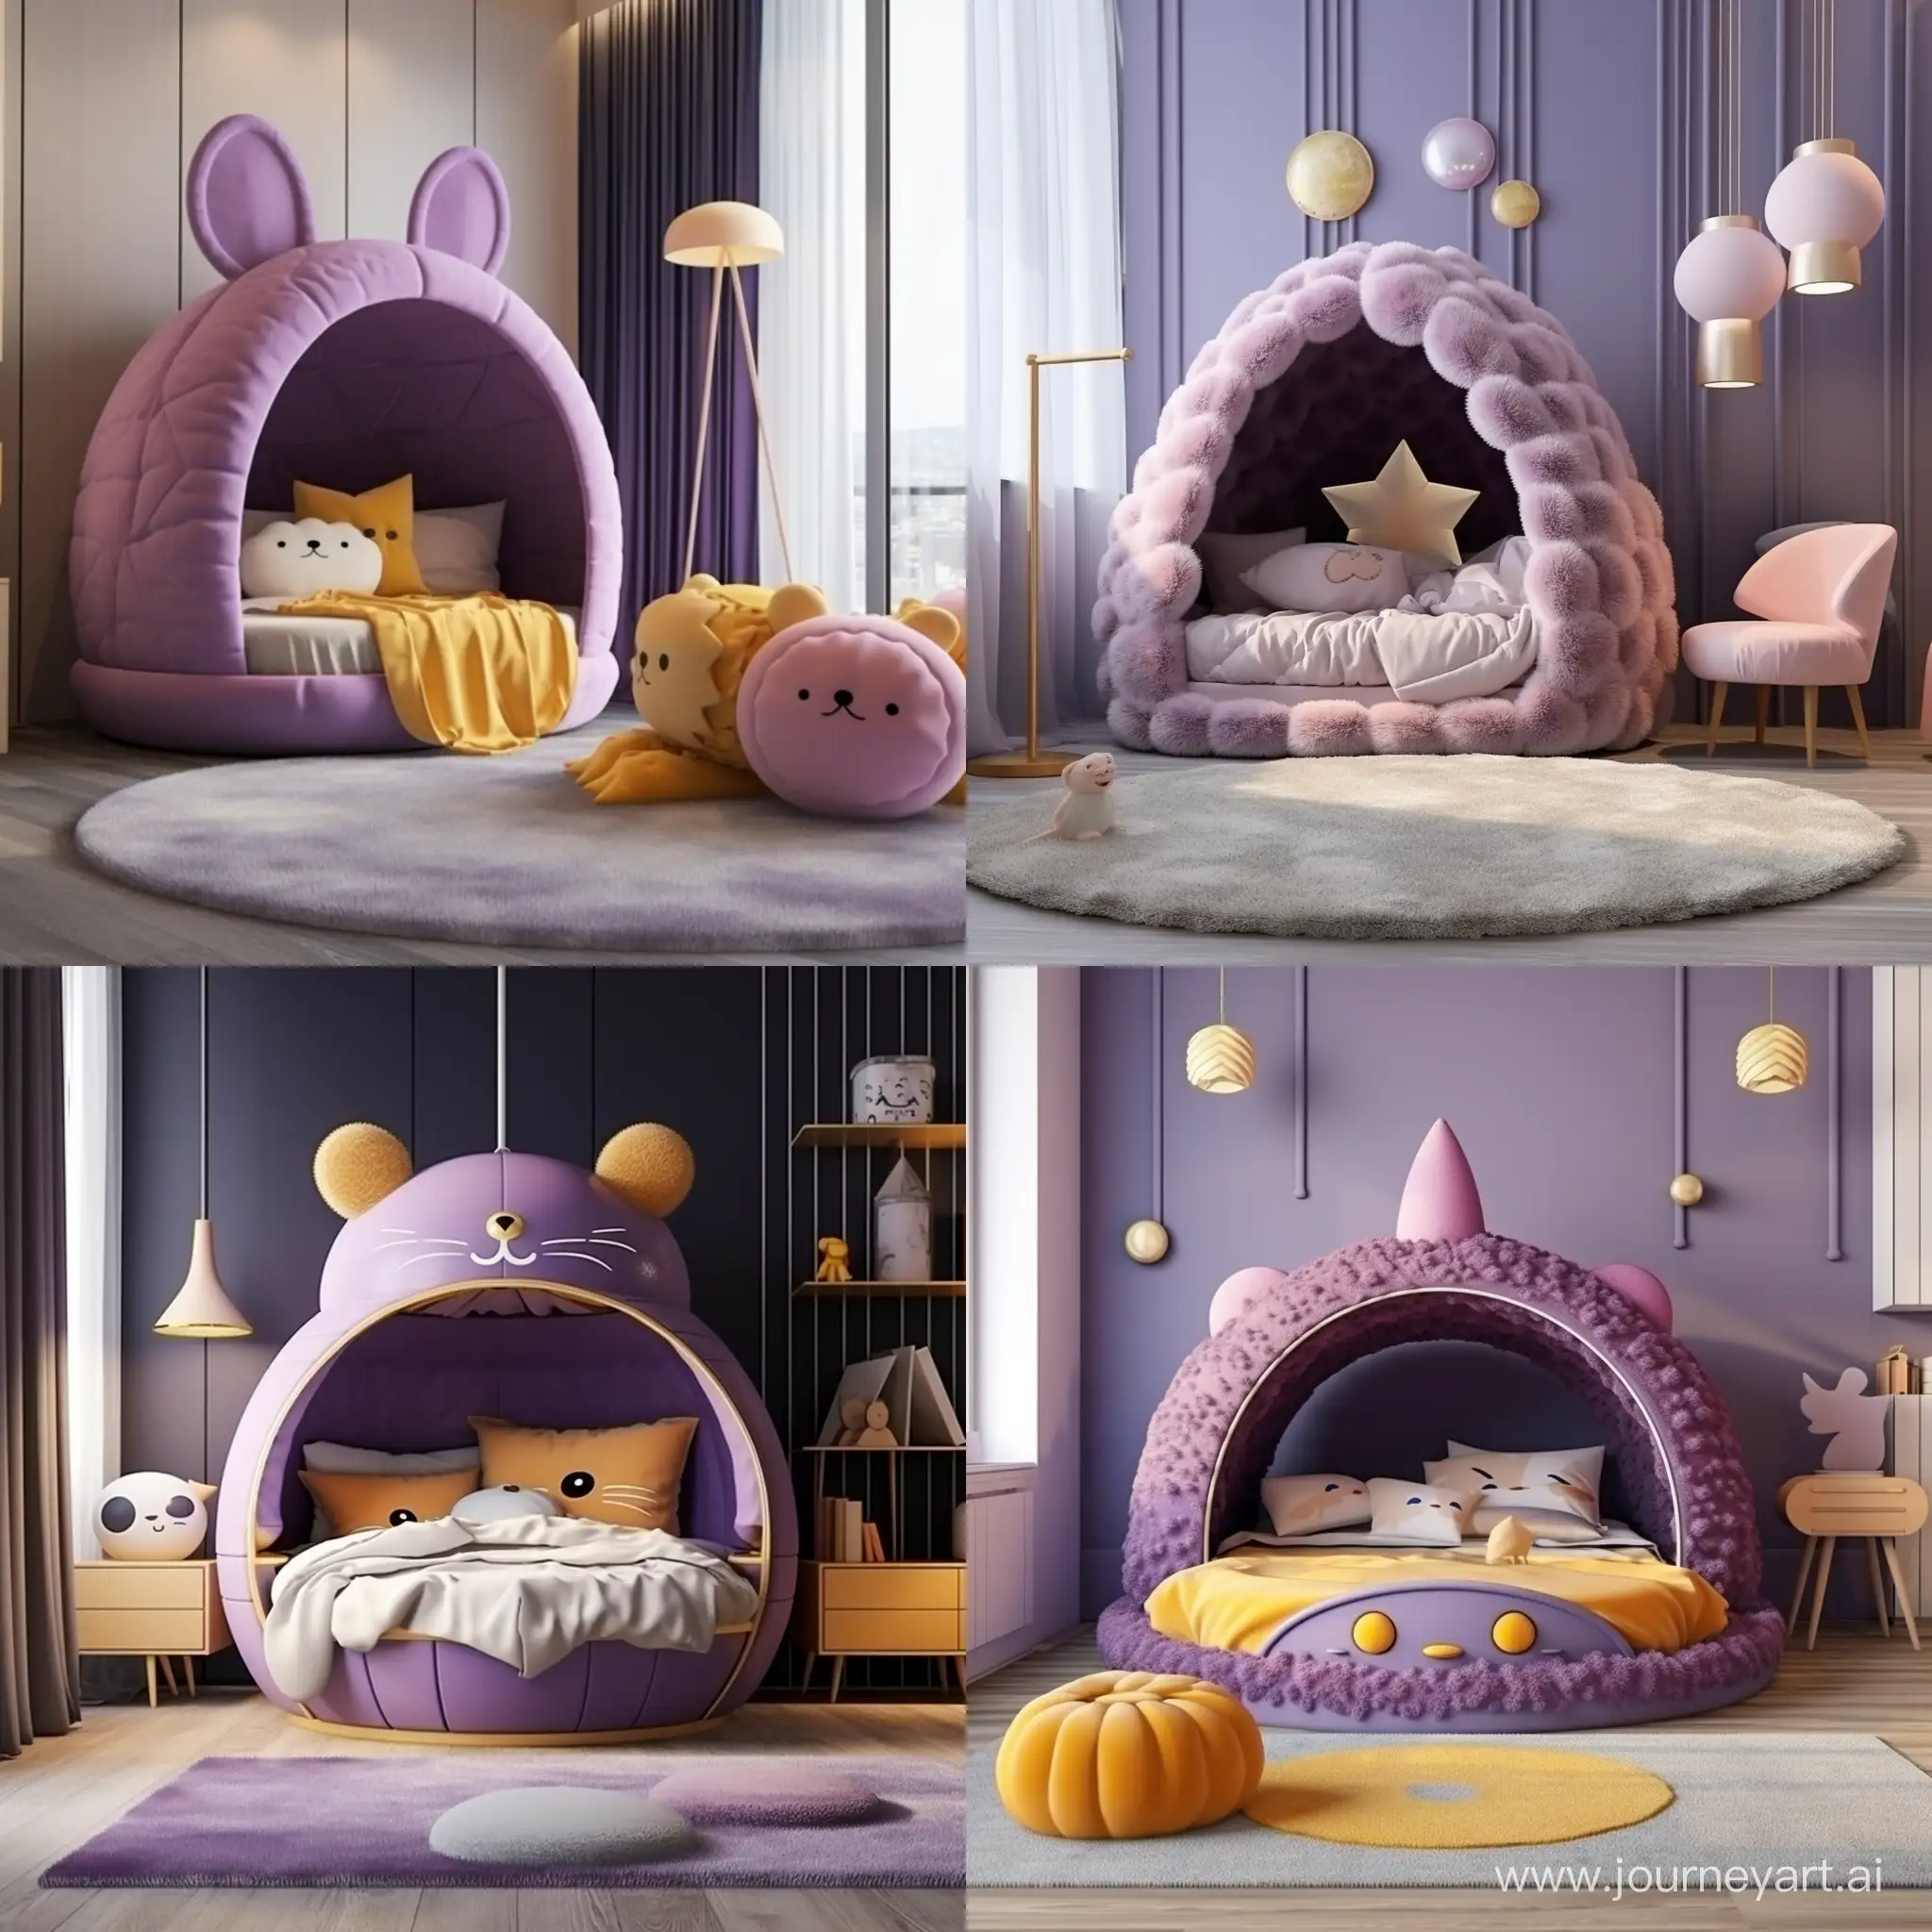 a purple sphere soft small size of bed for children's with a cartoon cute gold and glam theme, made from fluff and fur with roof, in cartoon style